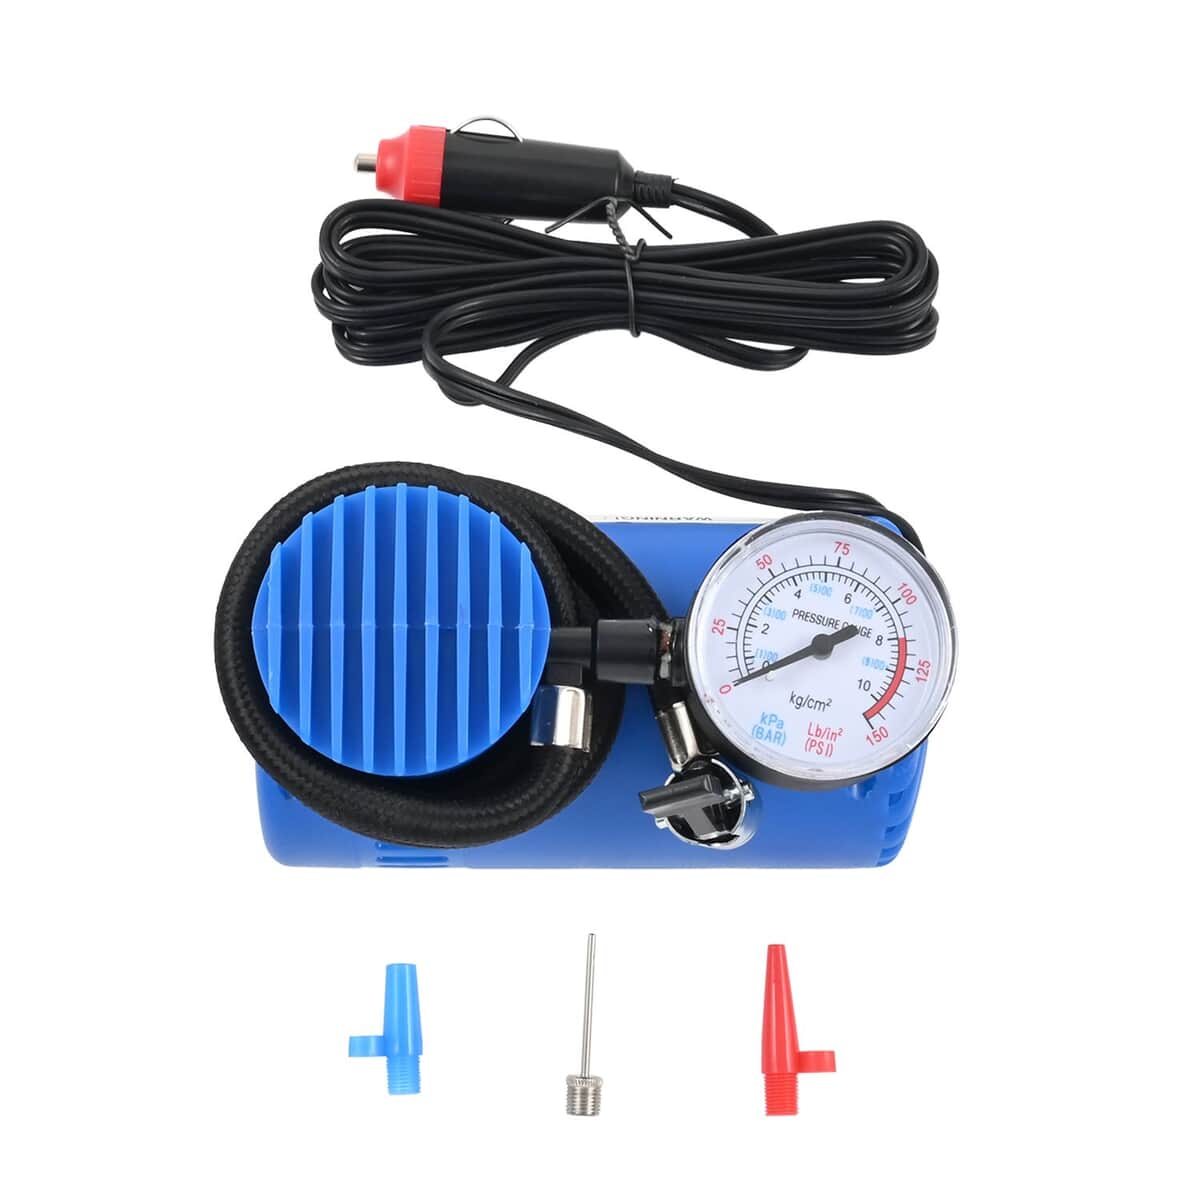 AUTO EFFECTS Mini Air Compressor with Built-in Pressure Gauge -Blue image number 5